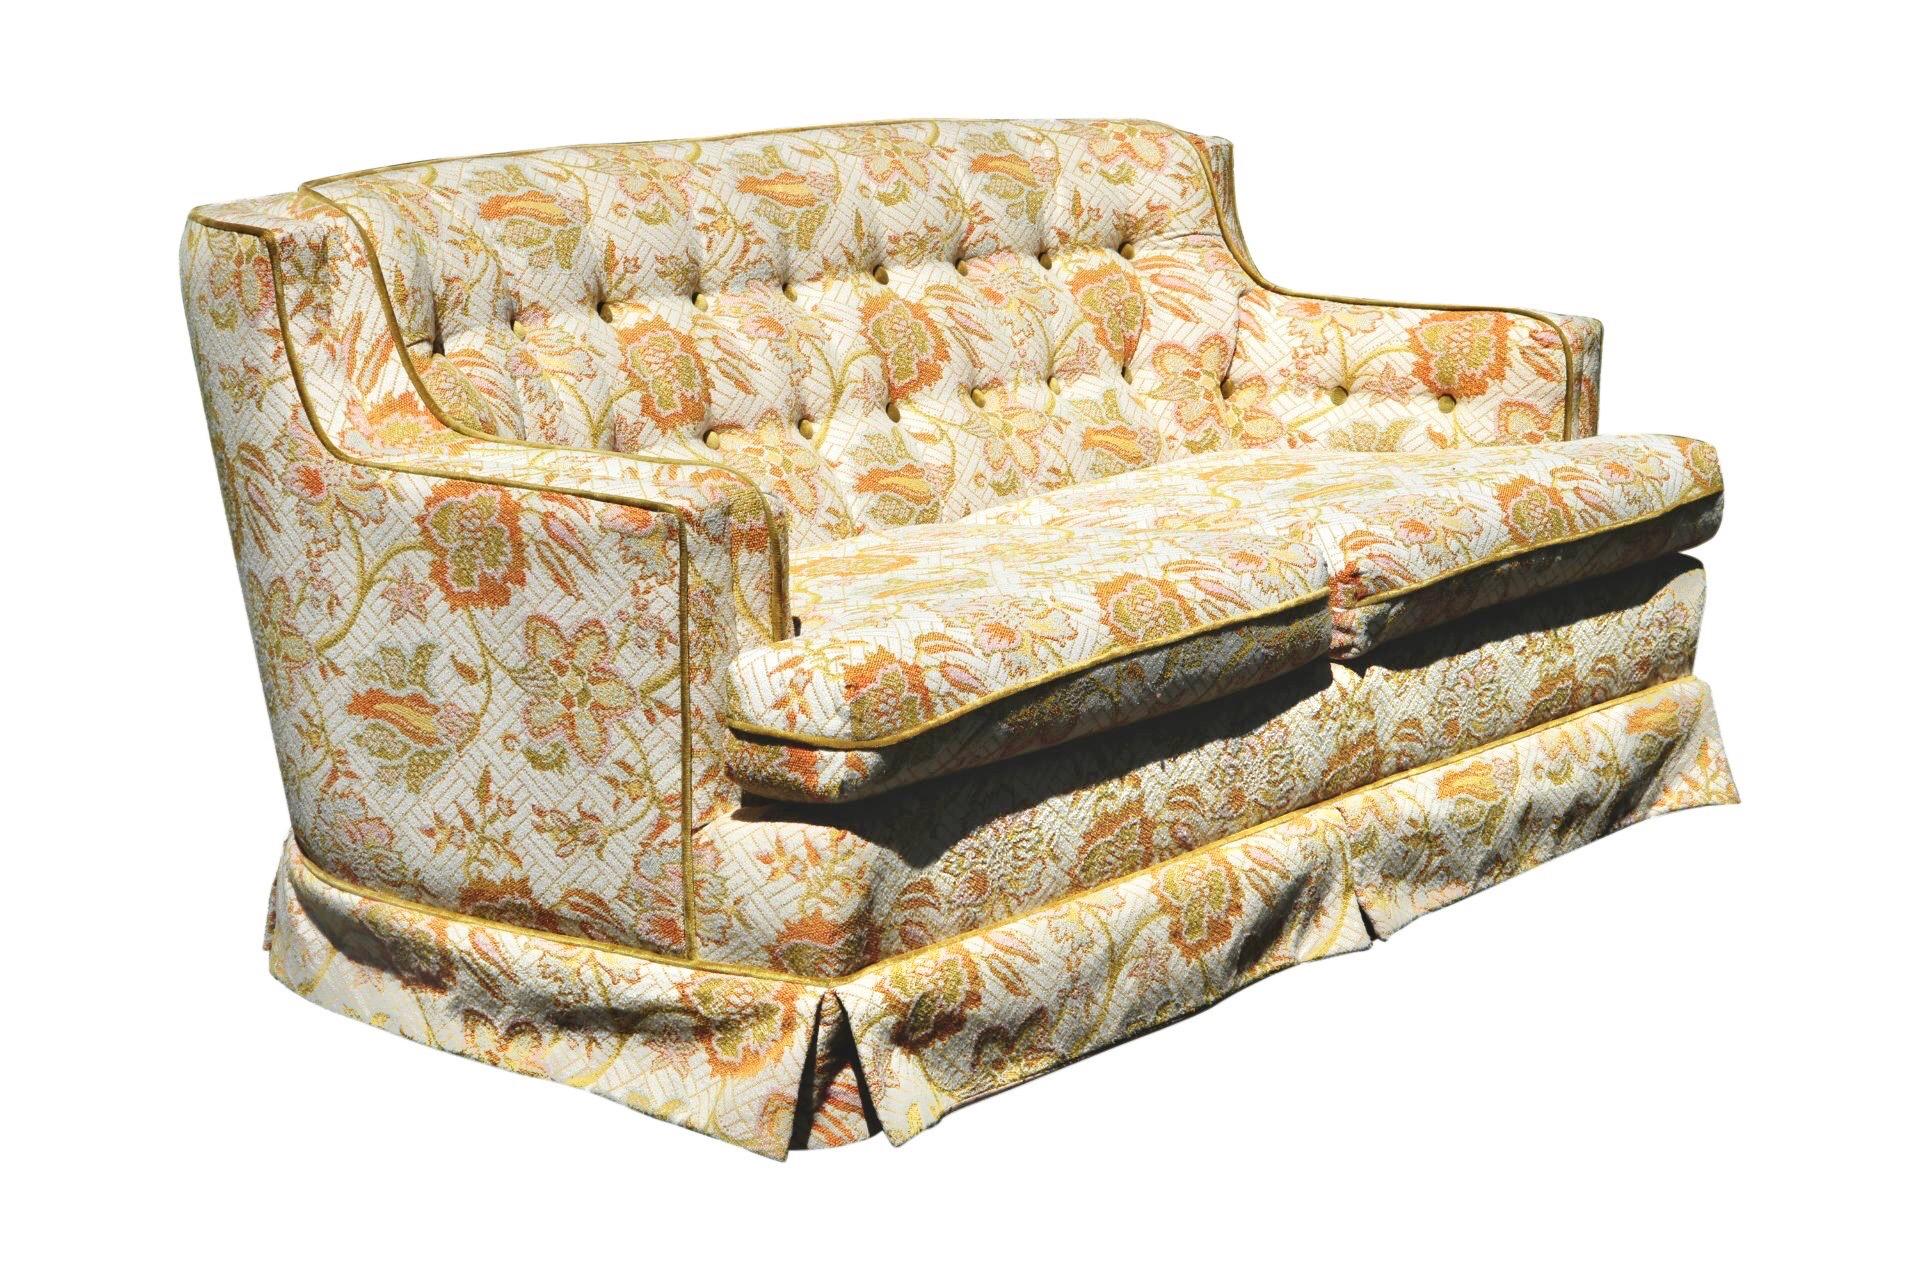 A mid century tufted floral loveseat sofa made by Style House Custom Furniture for Montgomery Ward, dated 1967. The sofa has a low profile with curved corners that meet flat arms. Upholstered throughout in a bold jacquard fabric decorated with